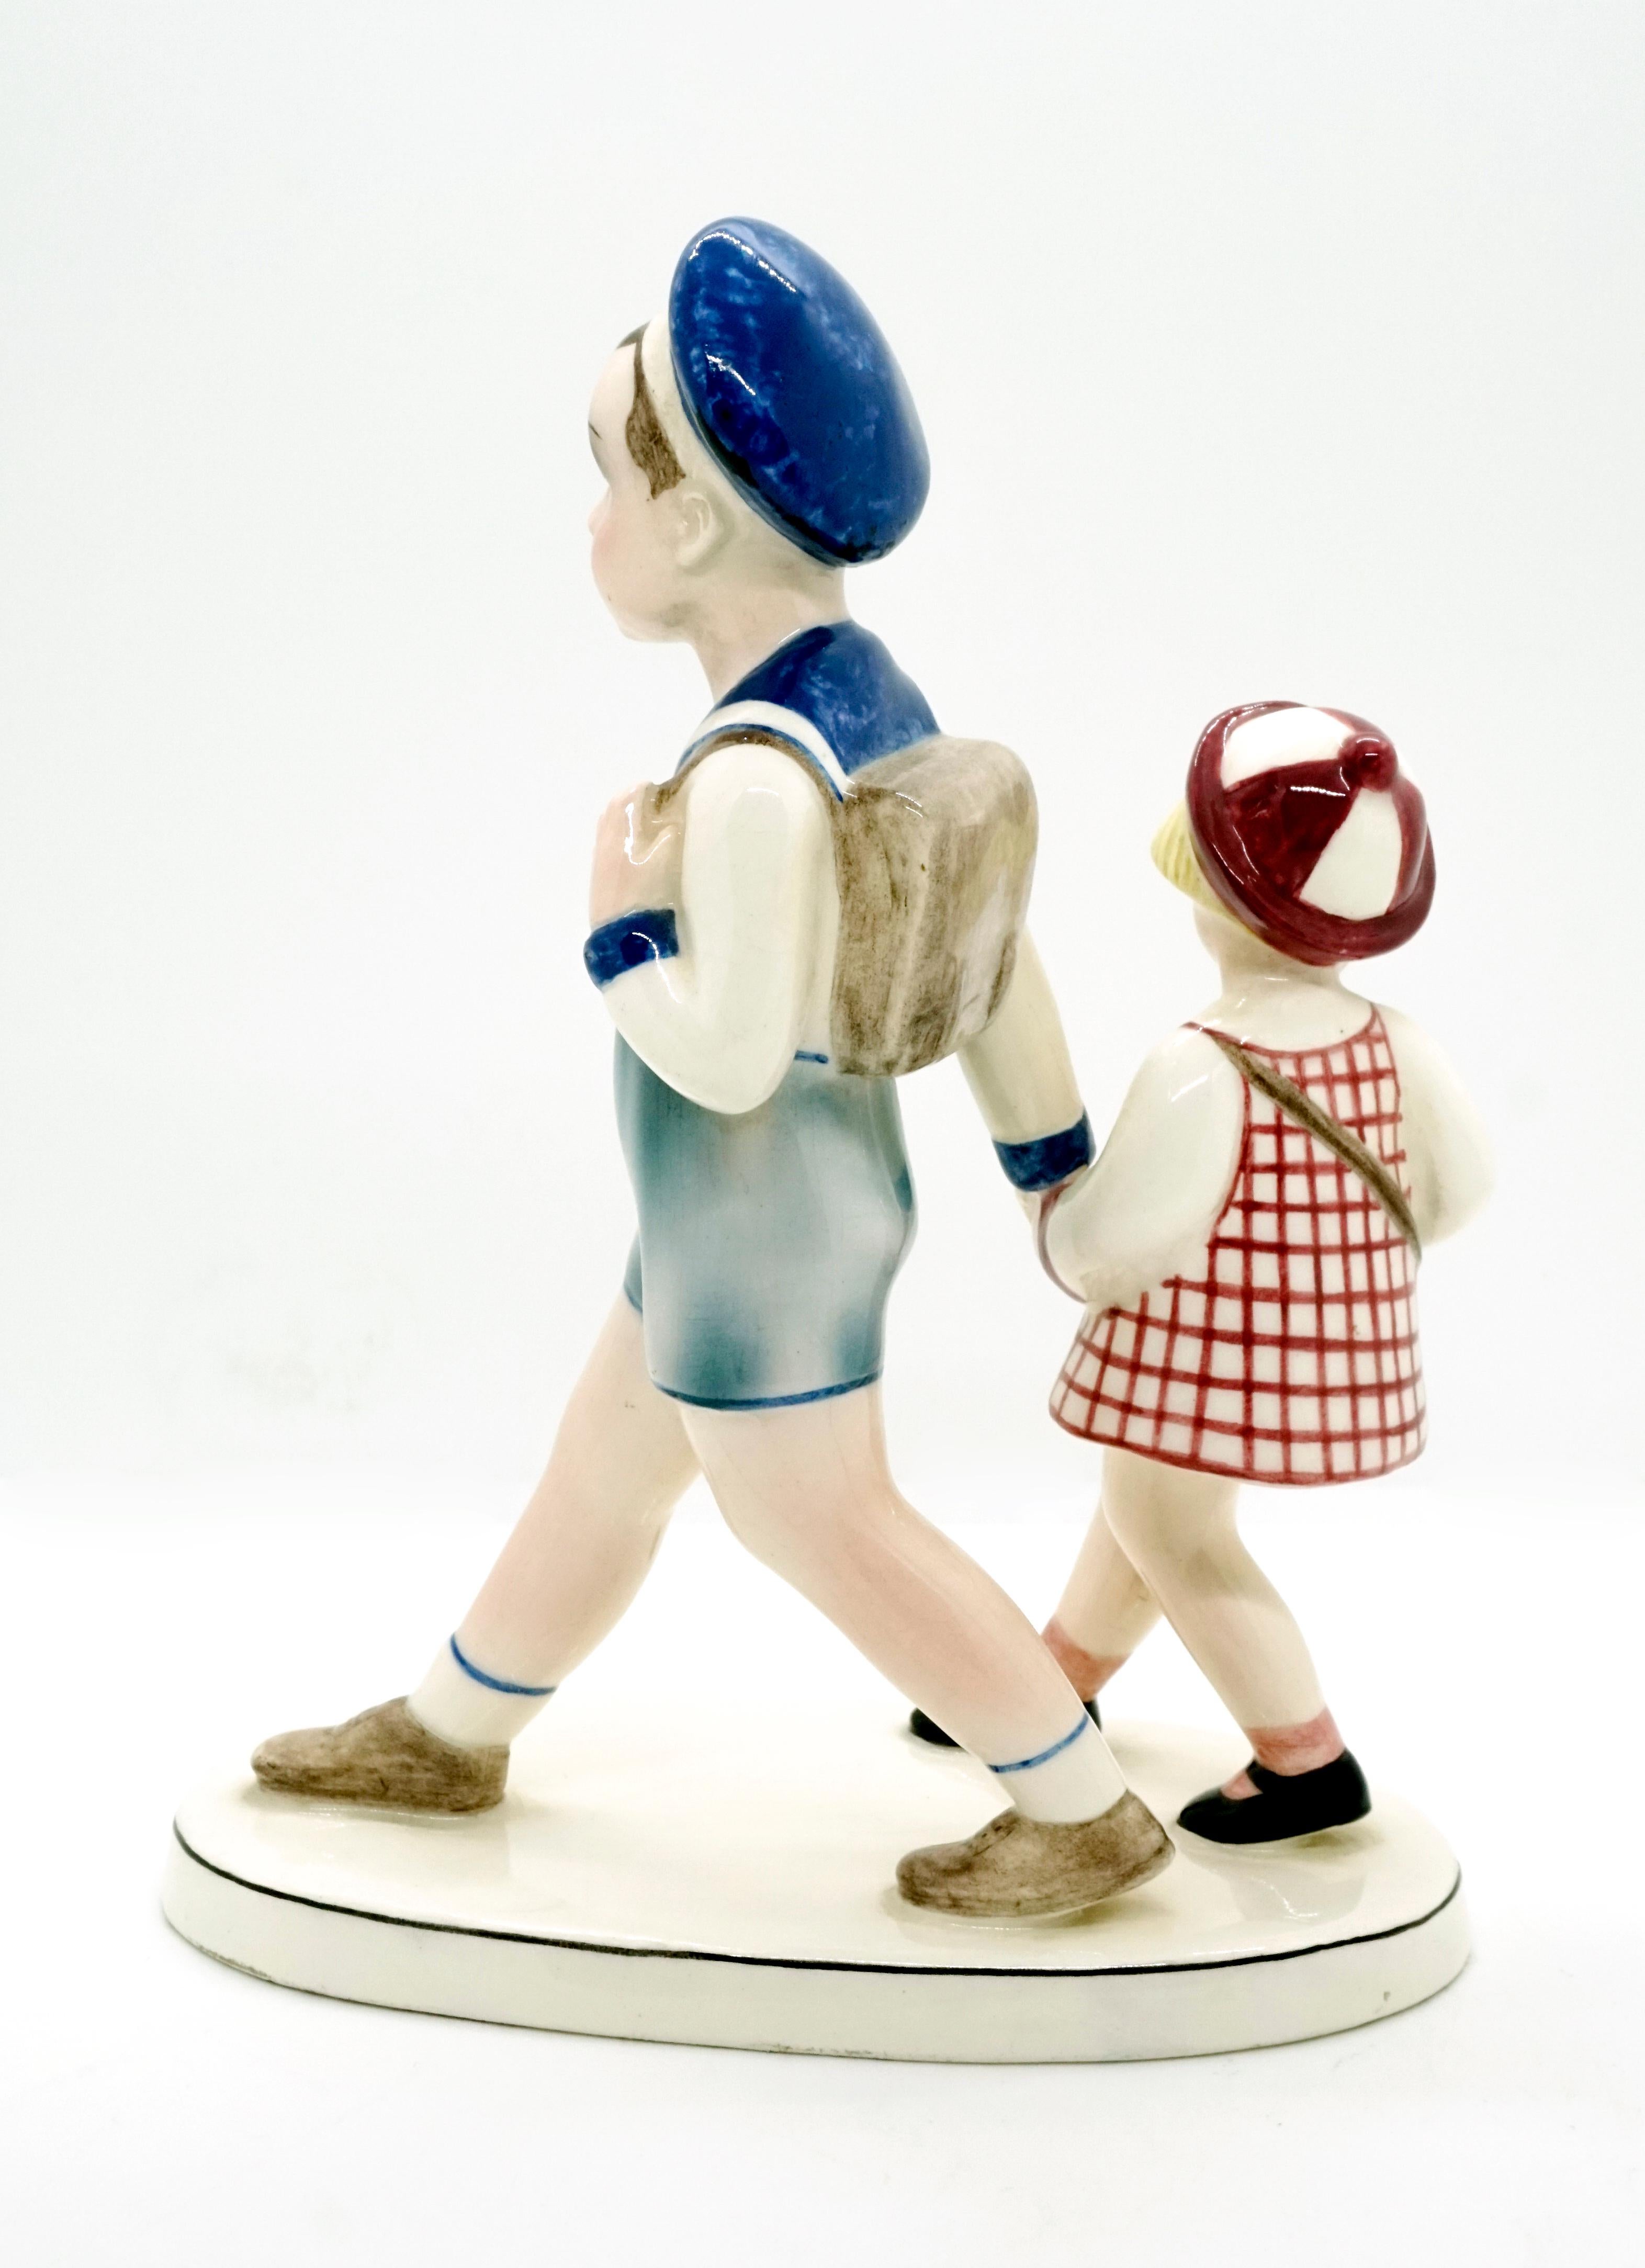 Especially rare goldscheider ceramic figurine group.
Boy in sailor suit with shorts, long-sleeved top and sailor hat, carrying a school bag on his back, leading a smaller girl lost in thought, clad in a short, plaid dress and red and white hat, by